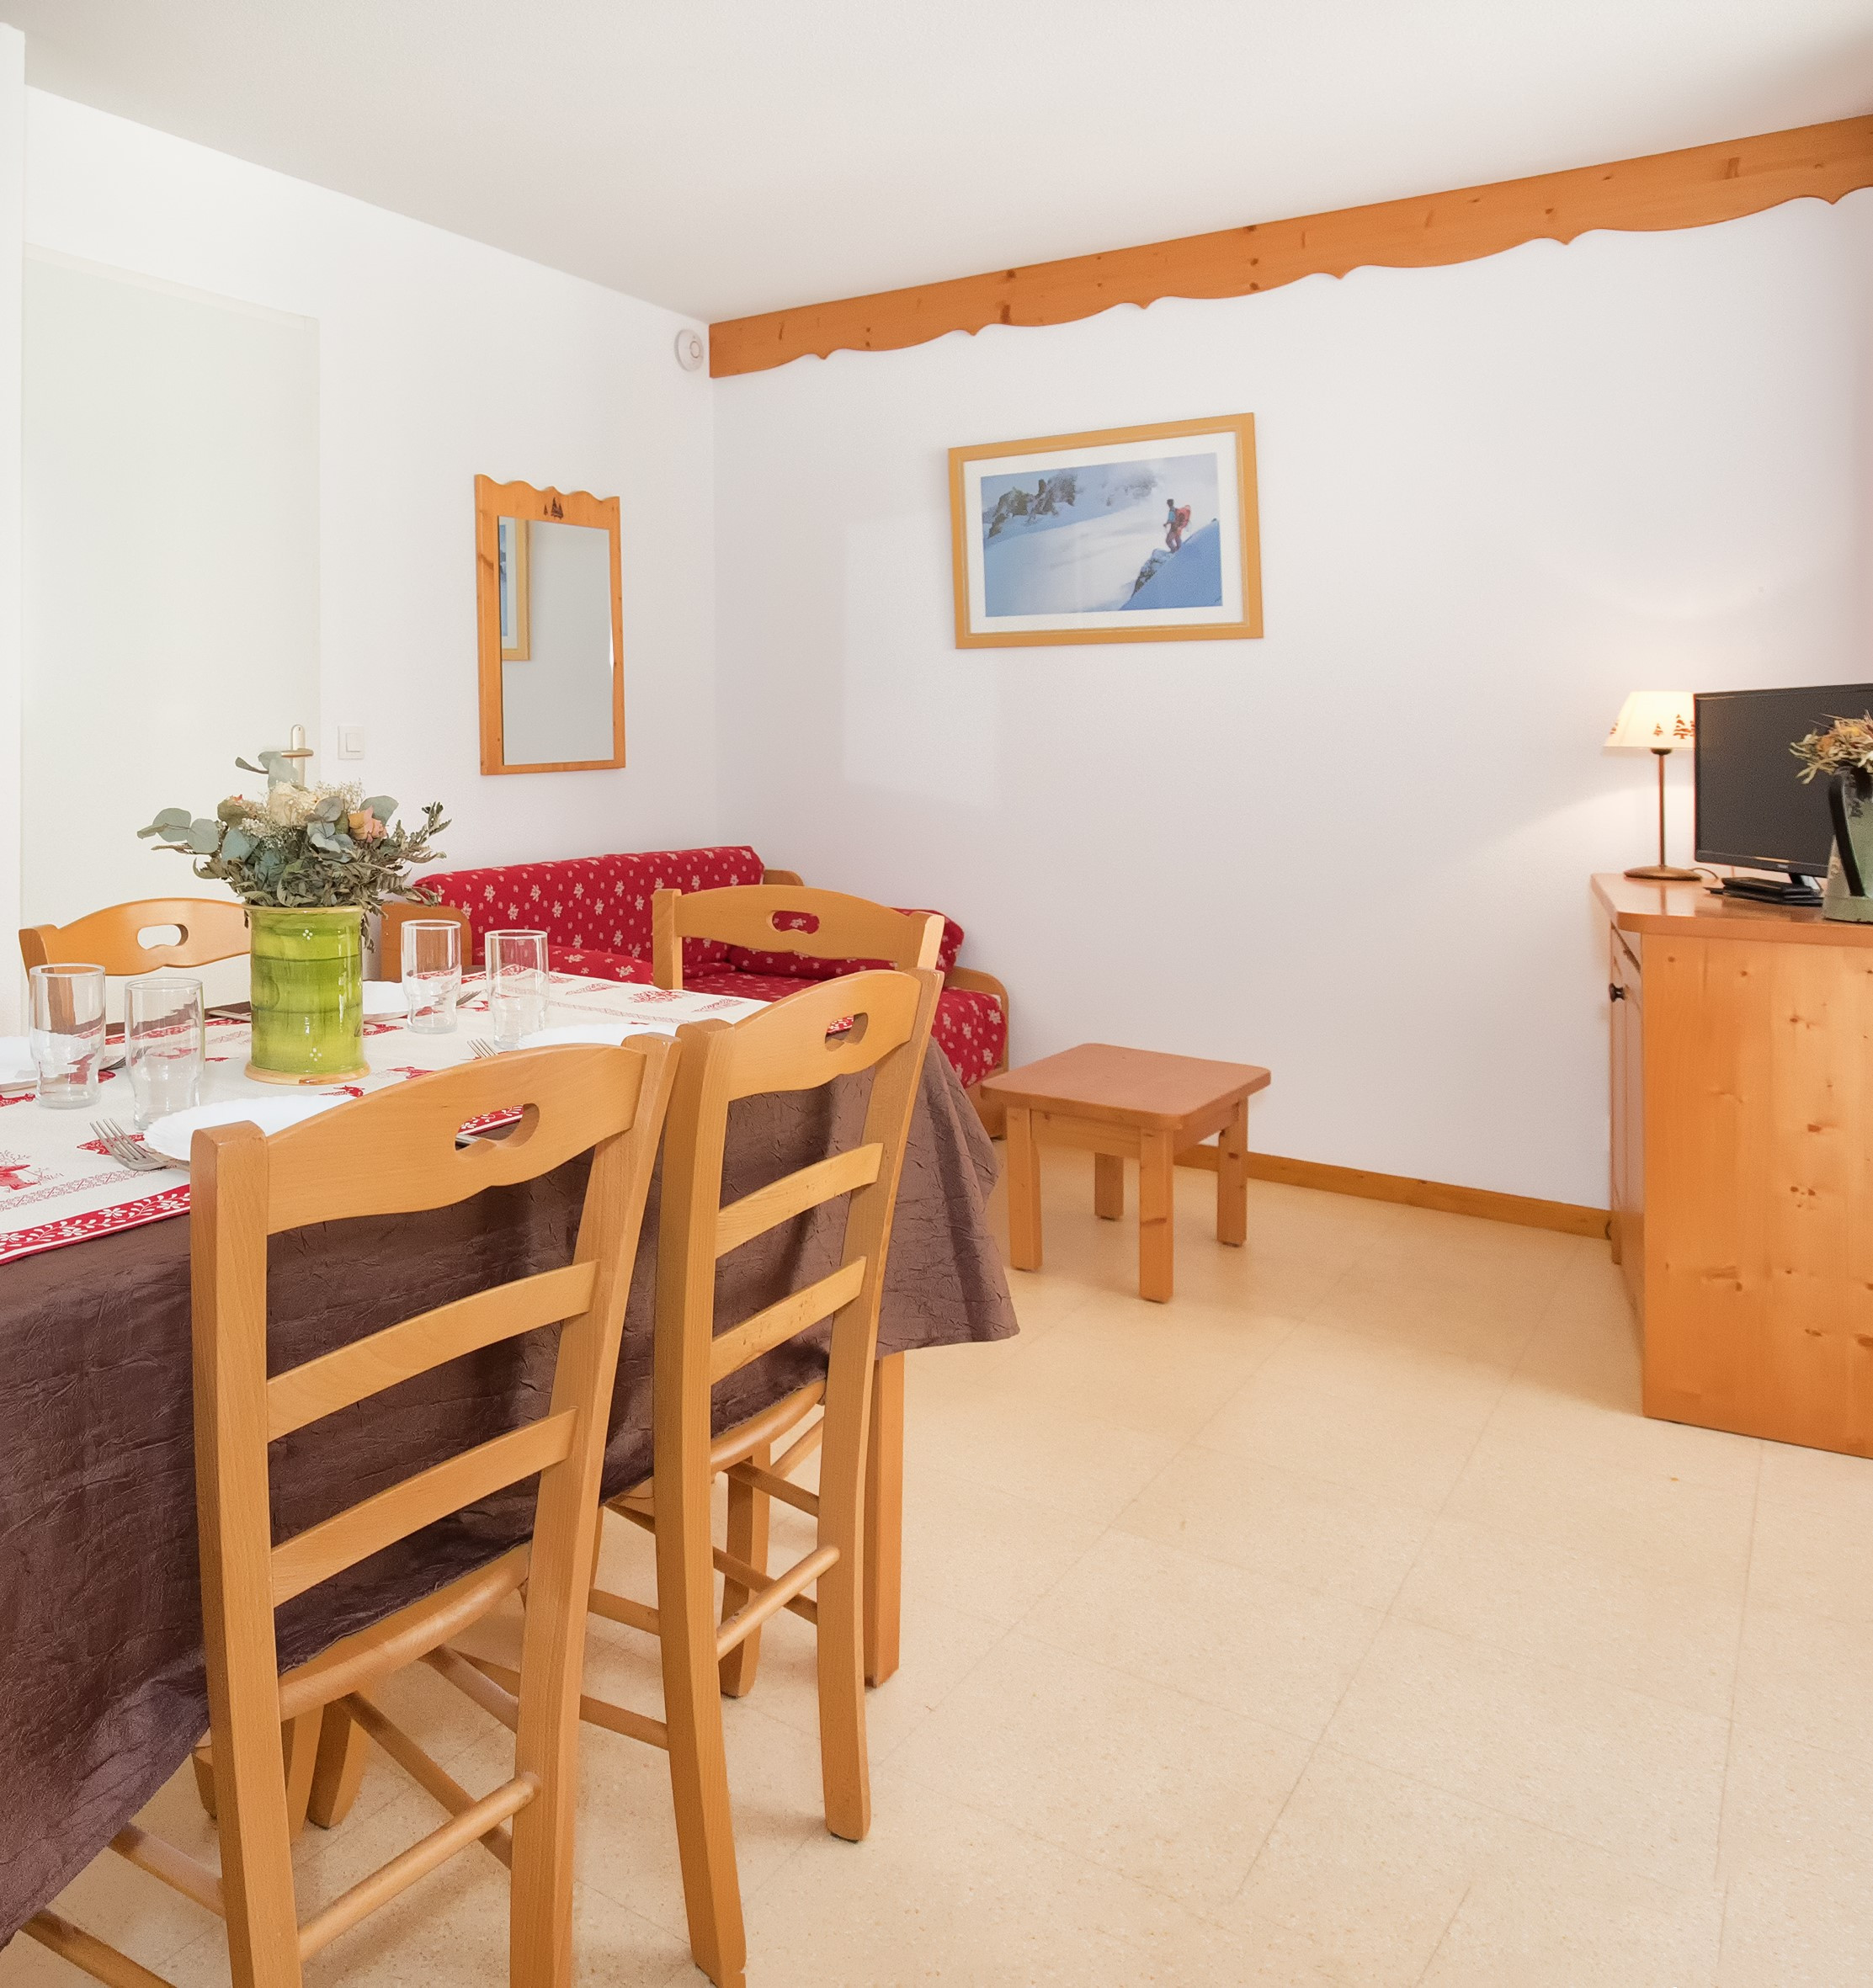 2 rooms 6 persons mountain view and view of the ski slopes - Apartements Balcons C 031 - PARC NAT. VANOISE appart. 6 pers. - Val Cenis Termignon